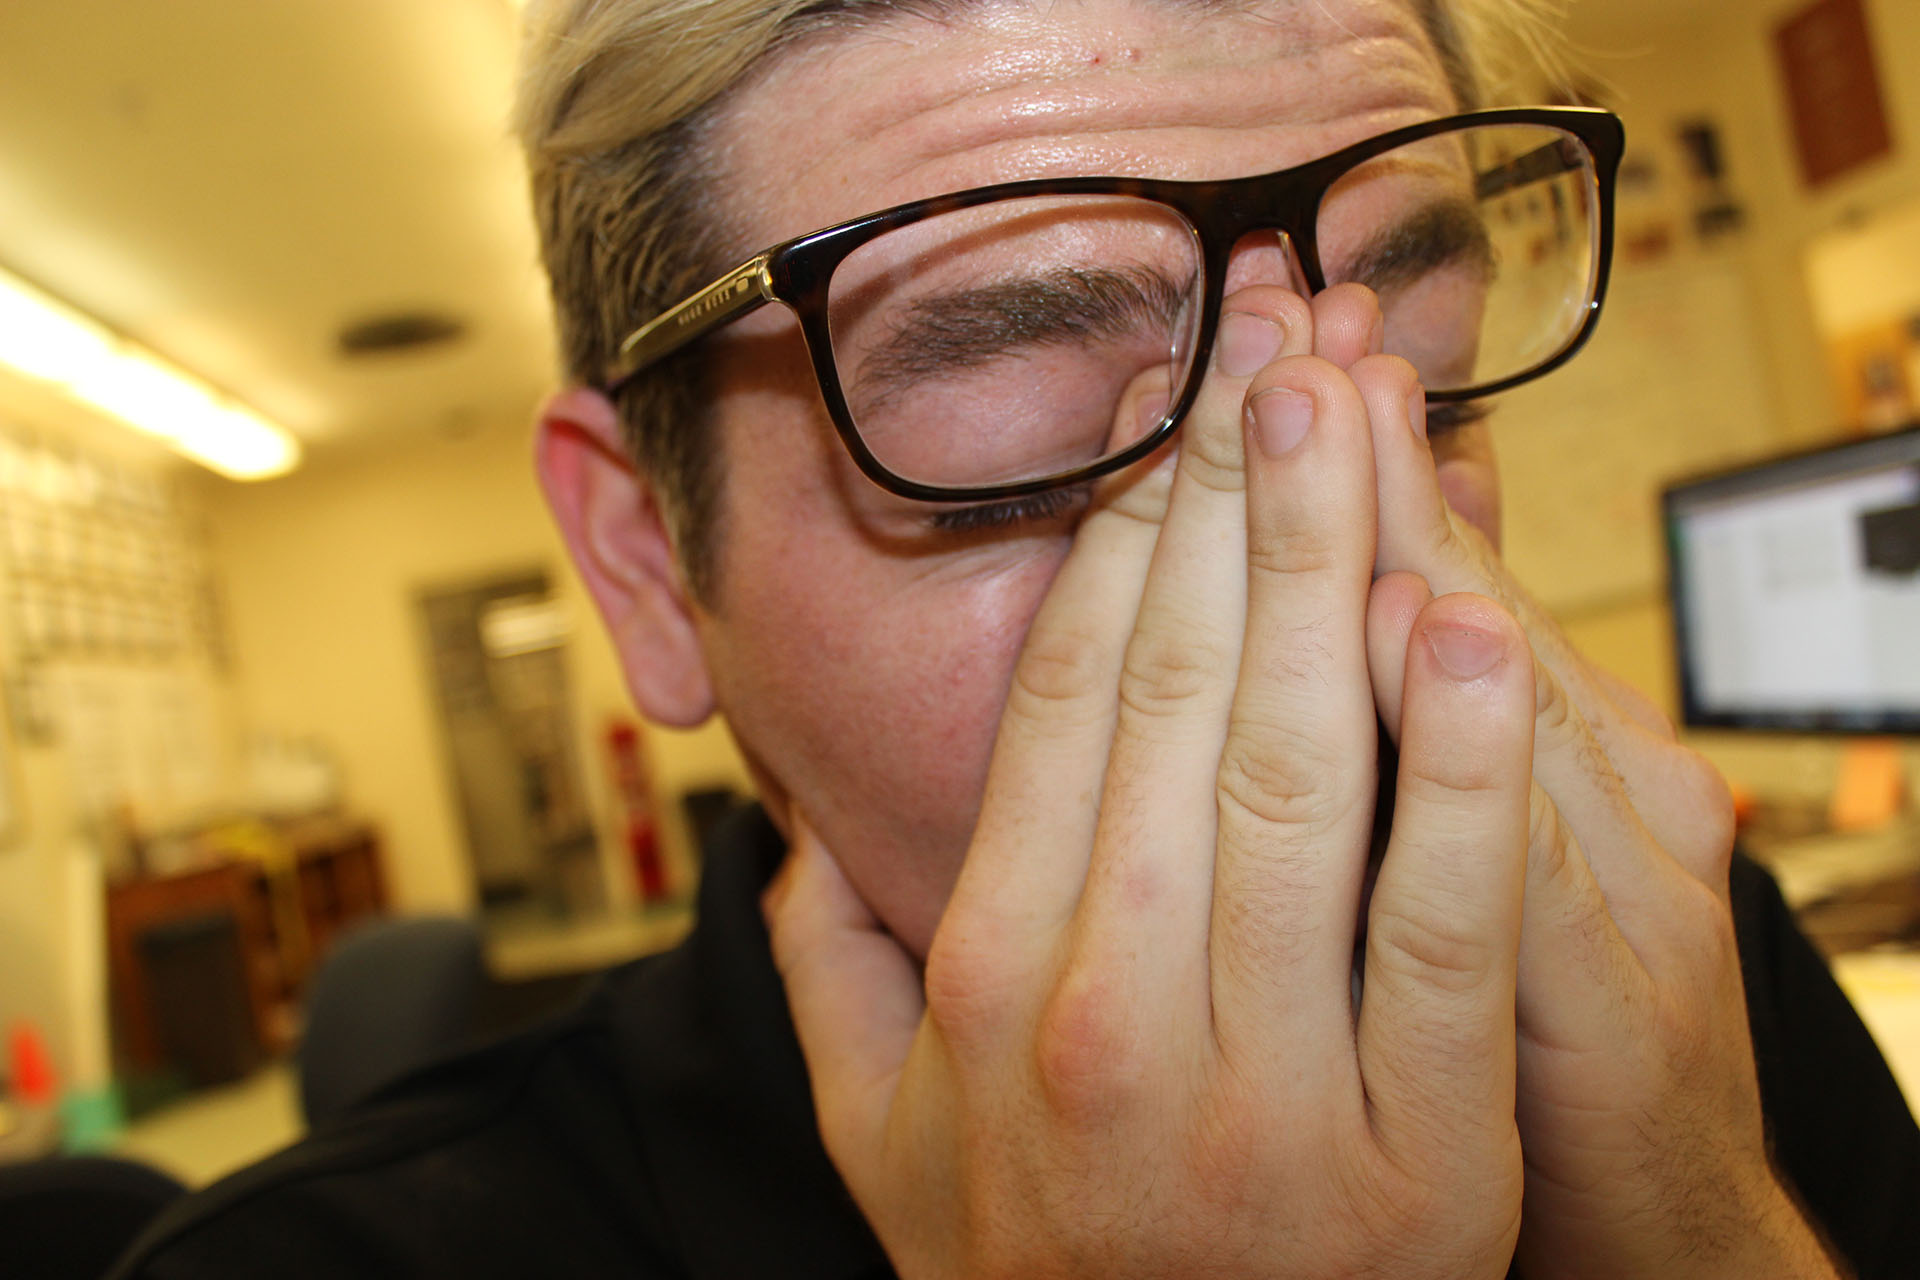 Tired Eyes - Staring at a computer screen has taken a toll on Dunn as he rubs his eyes with exhaustion. There is a sense relief as he adjusts his glasses knowing the newspaper designs are finally in production at the press. Journalism senior Alexa Bruington, one of Dunn’s best friends comments on his work ethic. “He does so much between Mustang News and school I’m shocked we still have time to hang out,” she said.